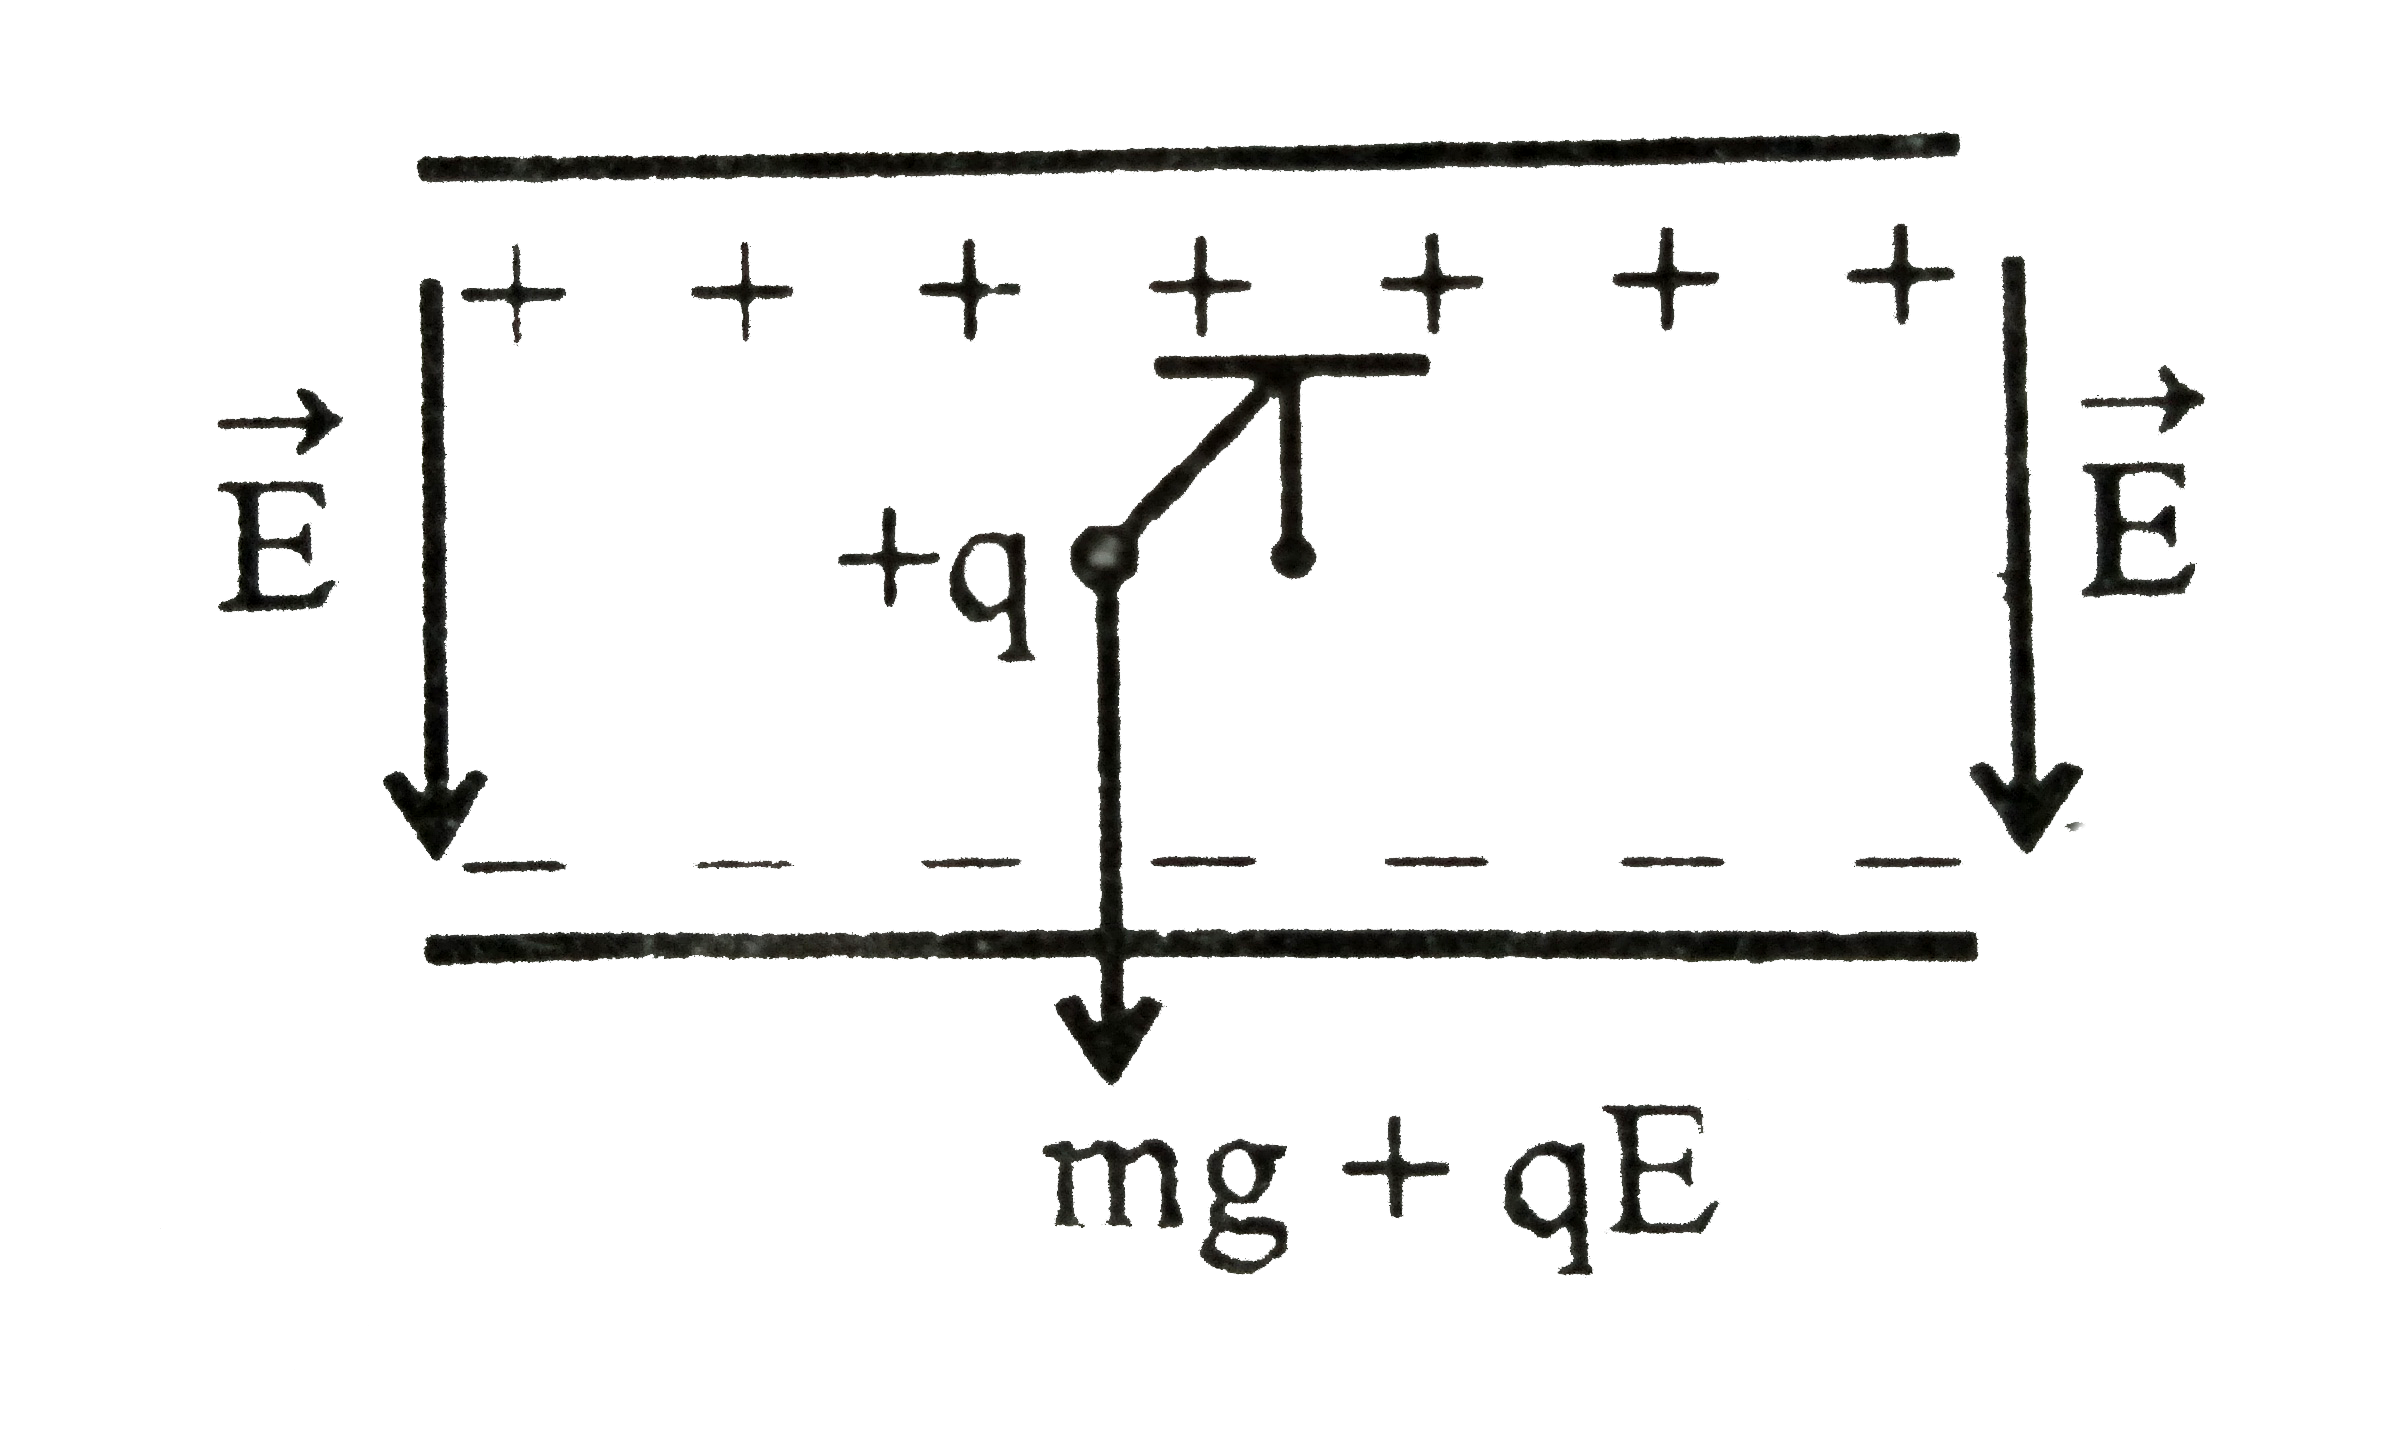 A simple pendulum having caharge  q1 mass ma and effective length 1, is suspended from a rigid support between the plates of charged horizontal capacitor. Electric field in the capacitor is perpendicular to the plates and directed vertically downwards .      If the plates are oriented such thet plates made an angel  theta with the horizontal then the new time period of the oscillation of the pendulum is give by .